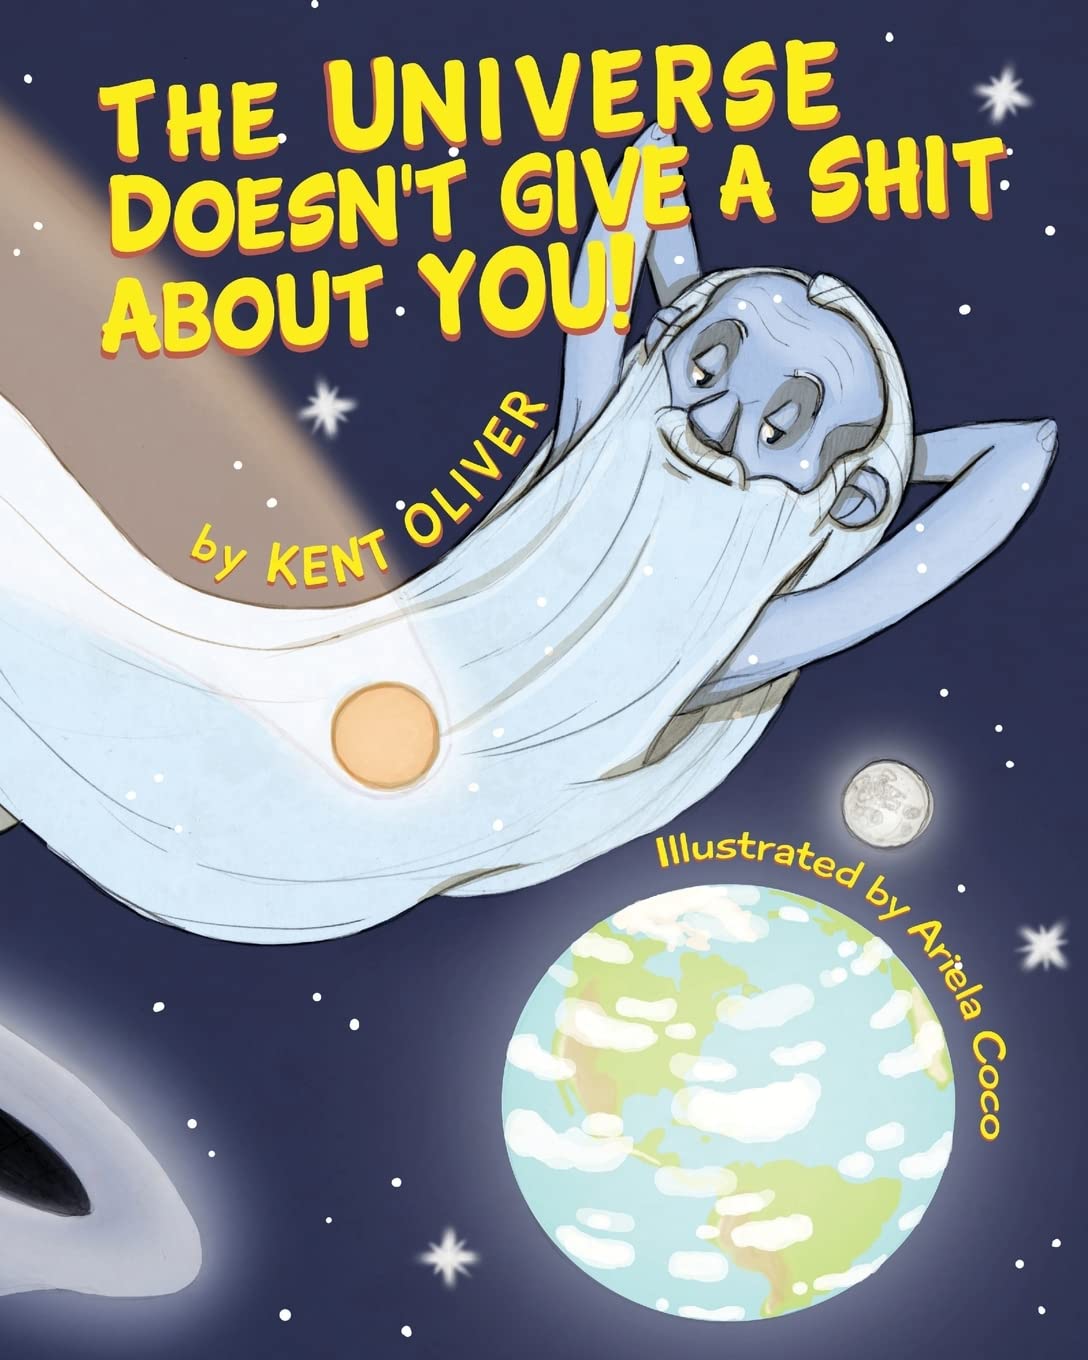 The Universe Doesn't Give A Shit About You!